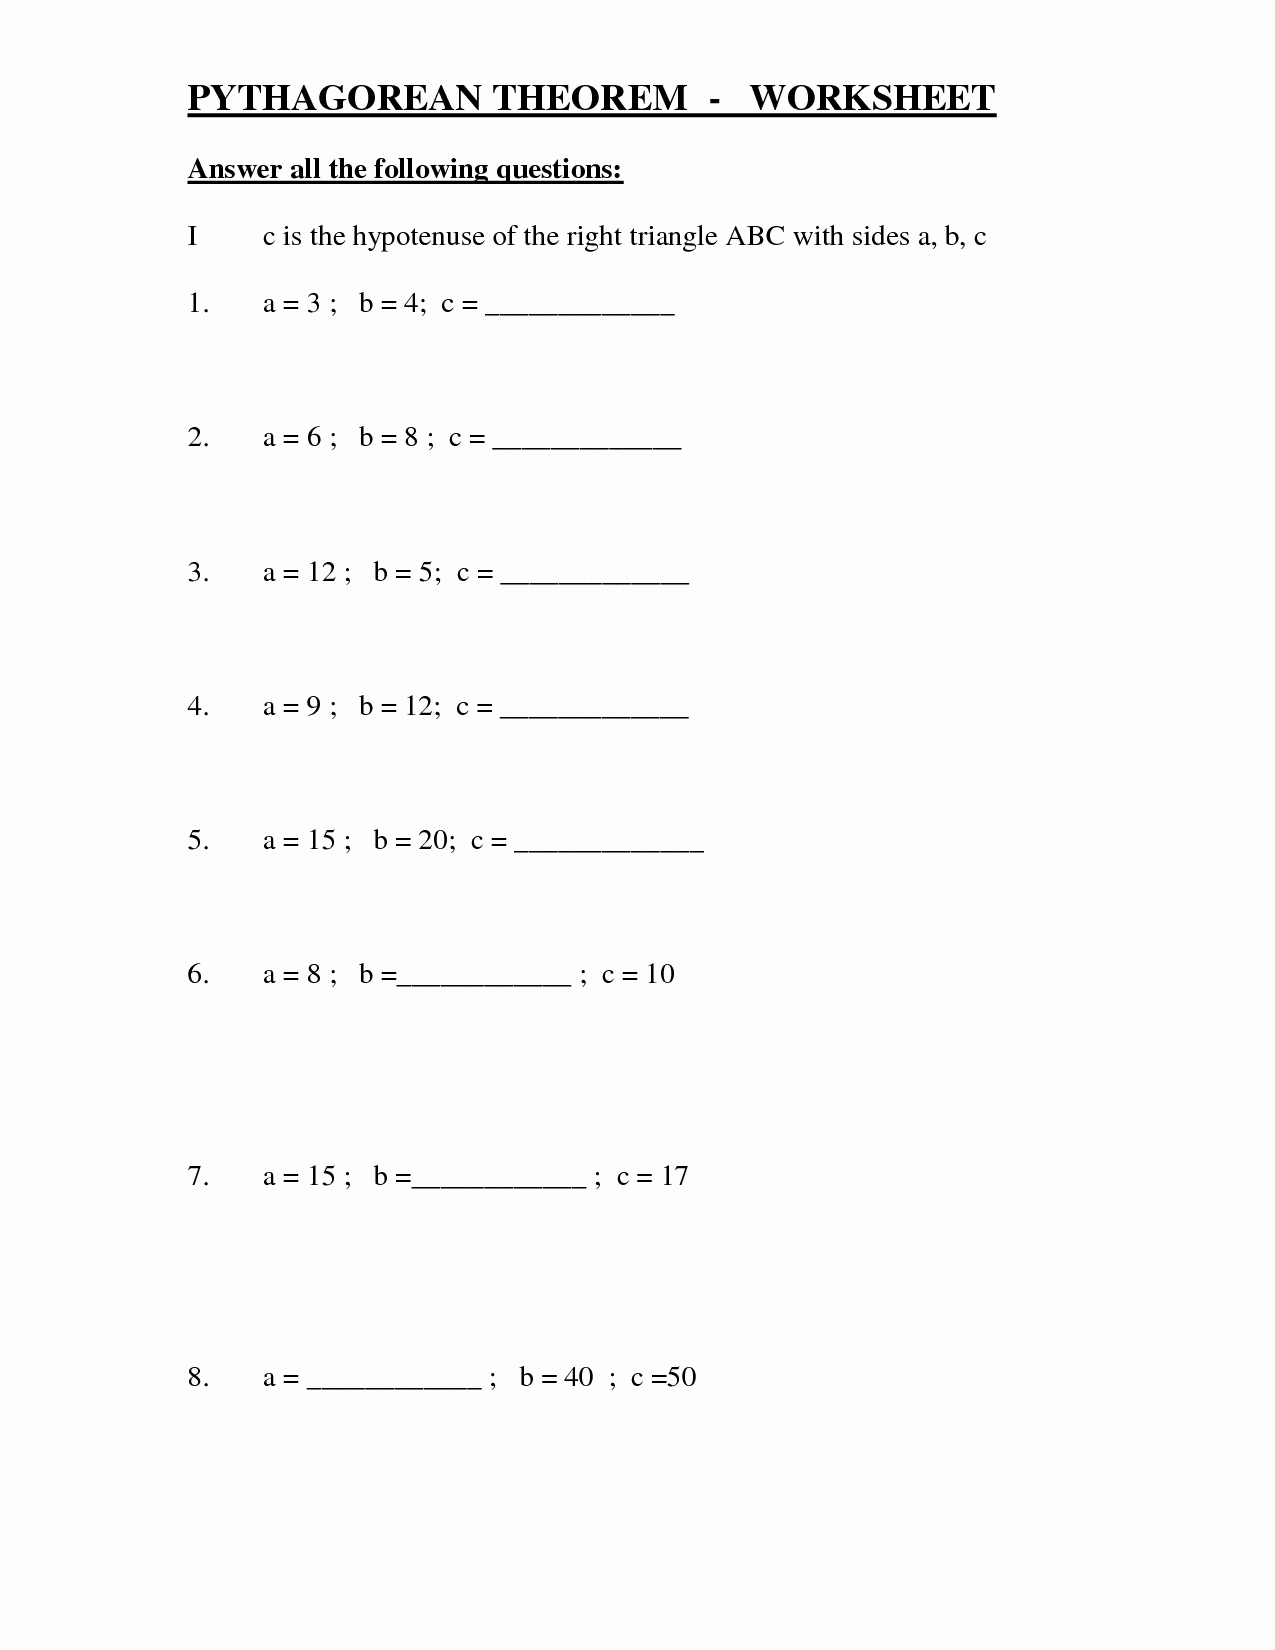 Right Triangle Word Problems Worksheet Unique Pythagorean theorem Worksheets